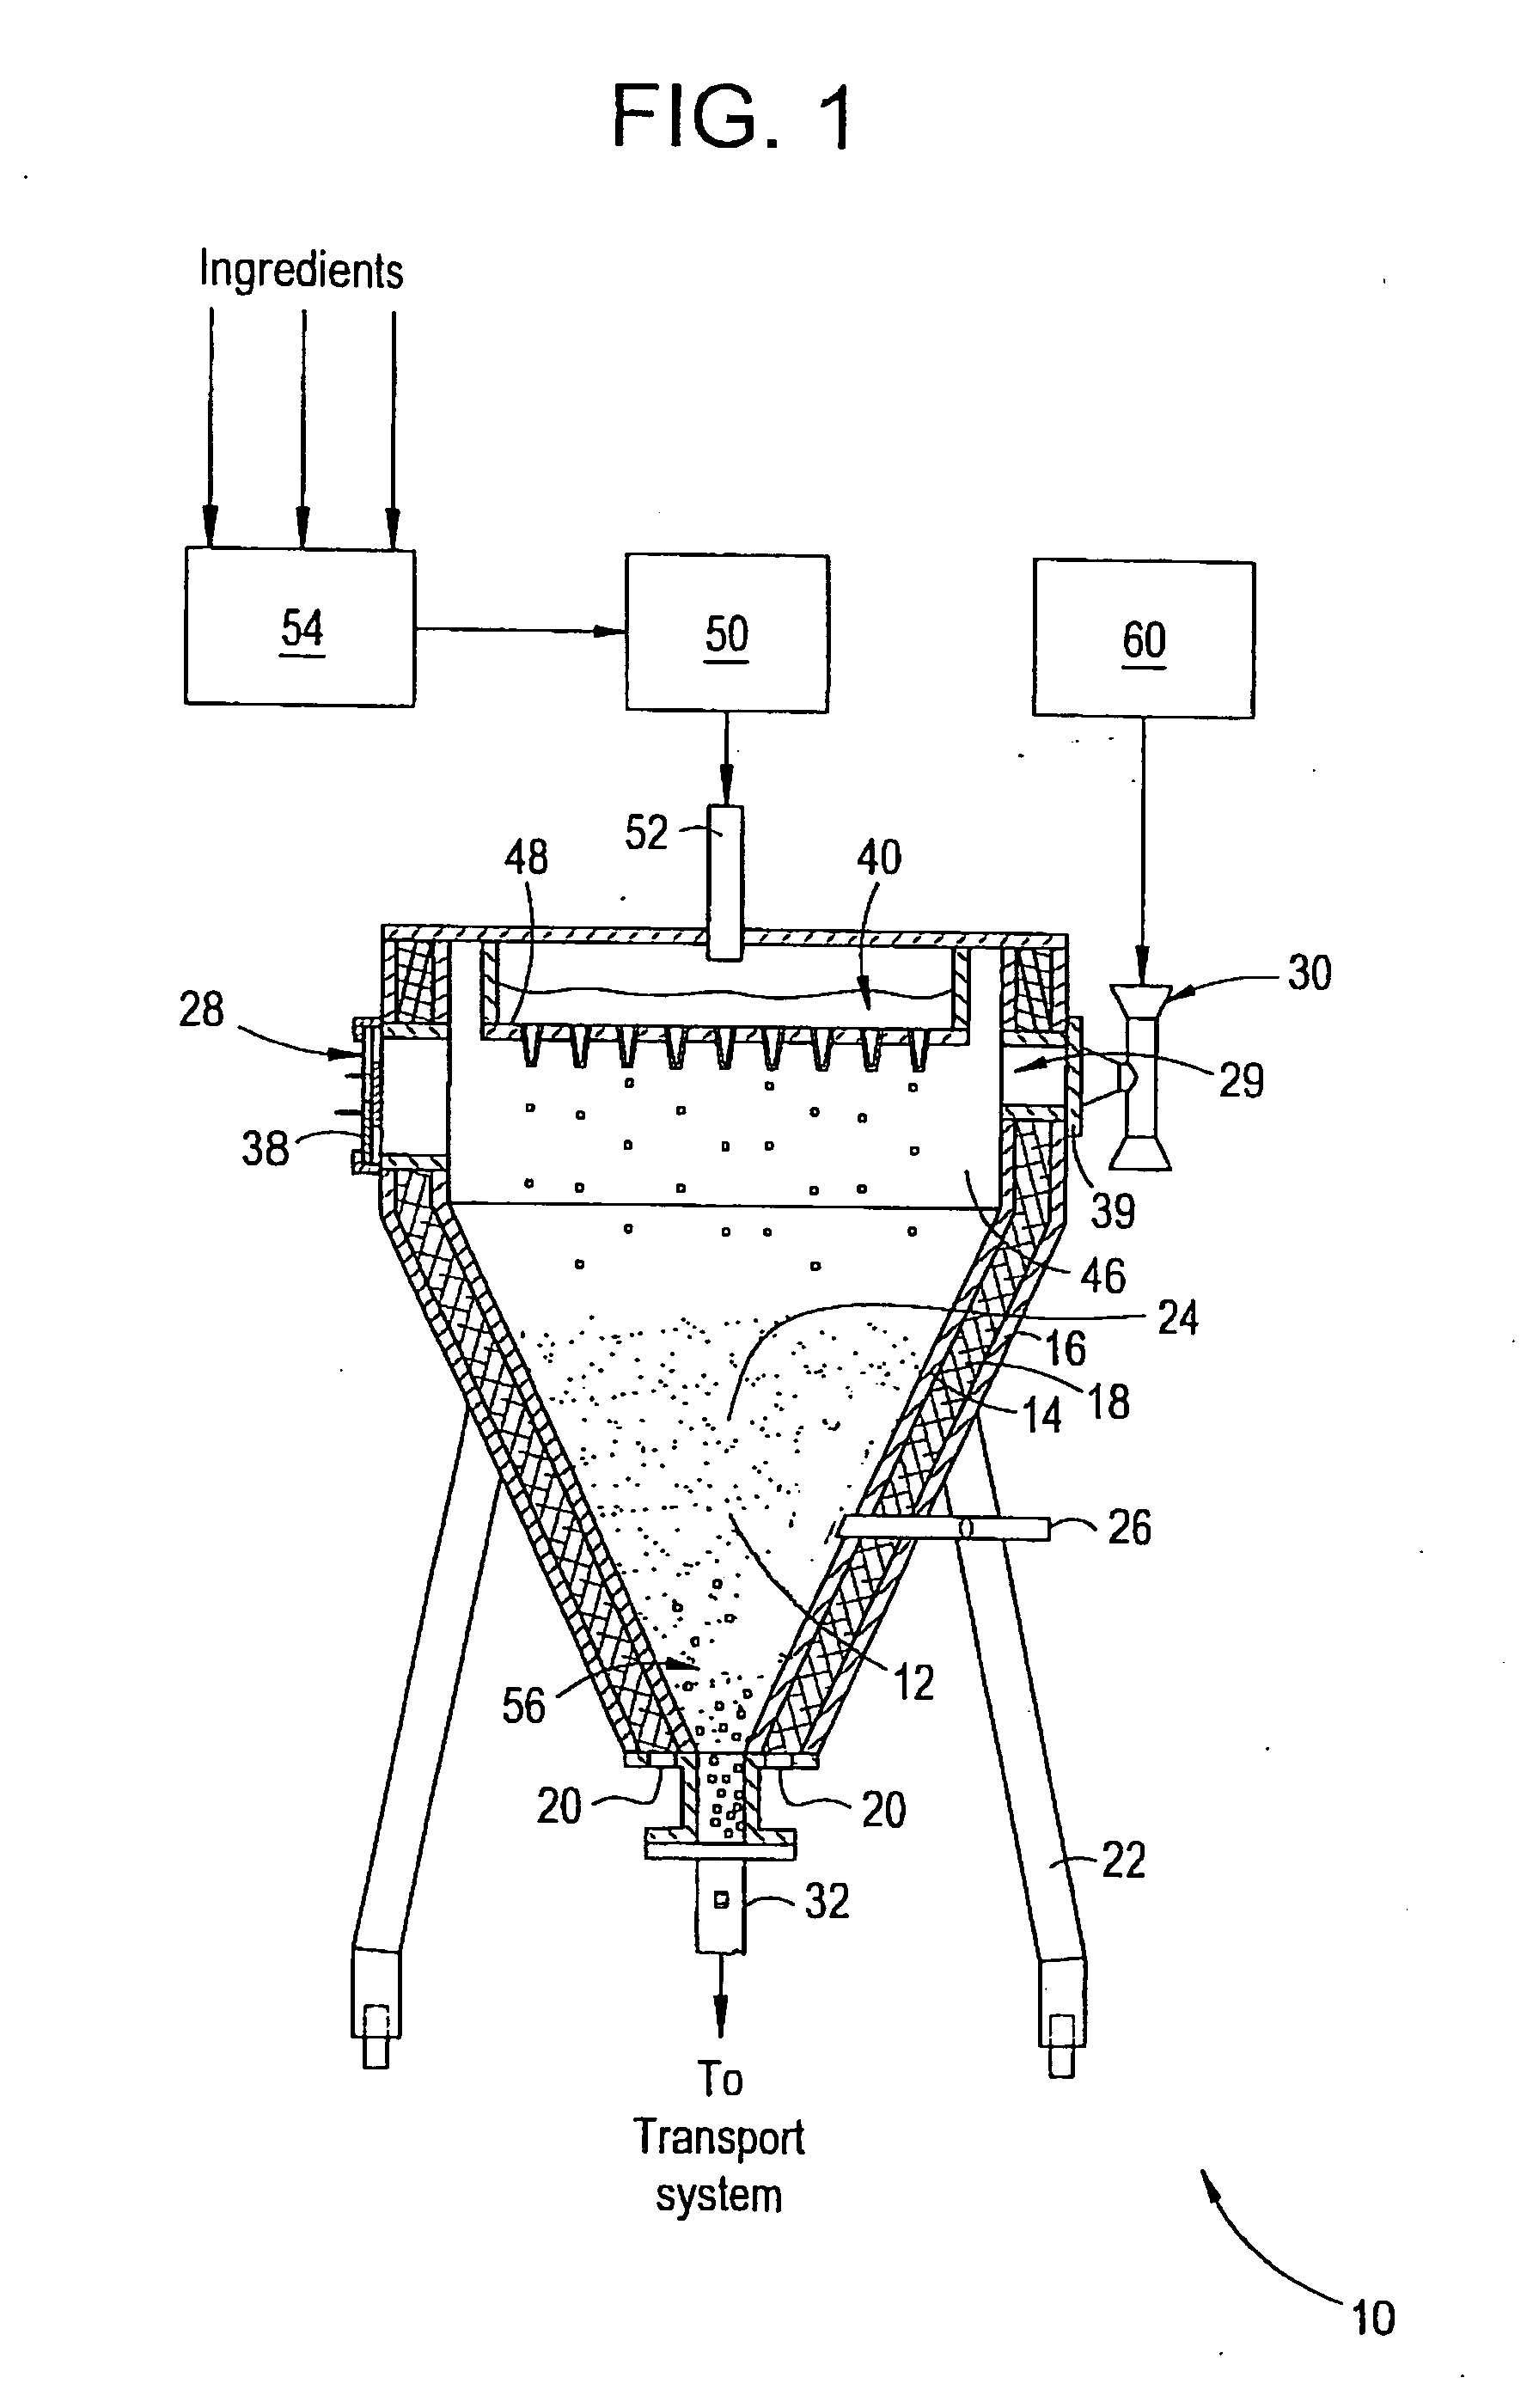 Method and system for flash freezing coffee-flavored liquid and making cold coffee-based beverages